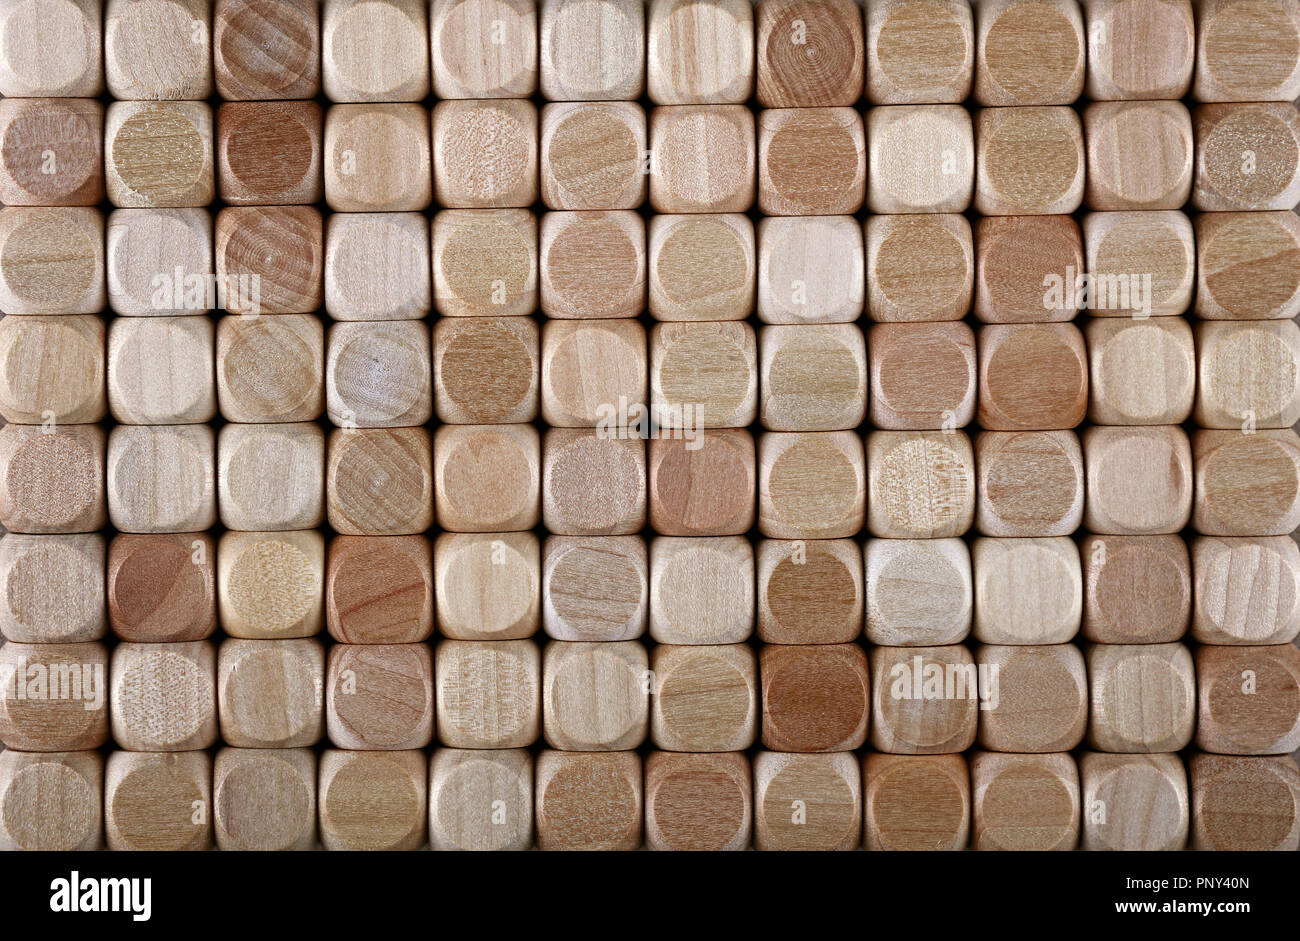 Close up background pattern of natural wooden dice shaped toy building blocks, elevated high angle view, directly above Stock Photo